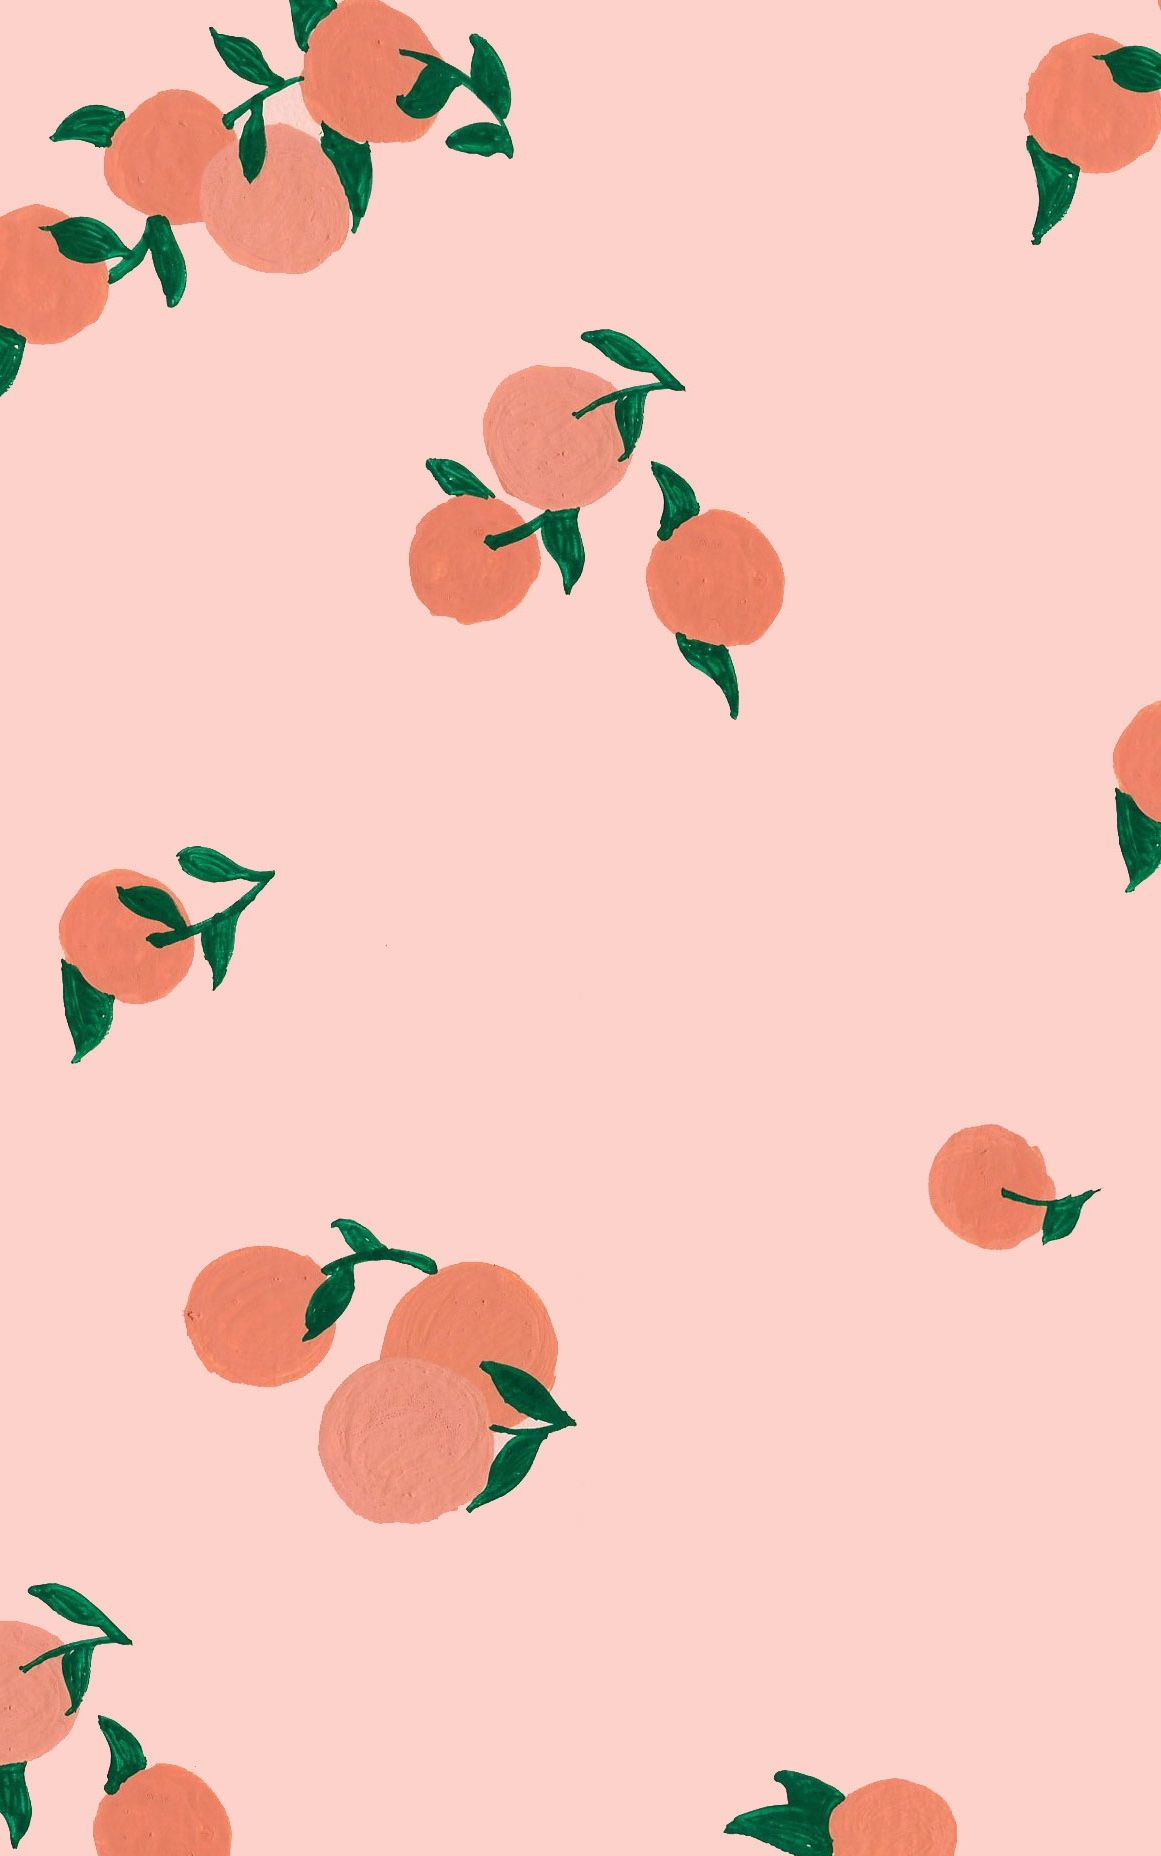 Aesthetic Peach Images Wallpapers - Wallpaper Cave